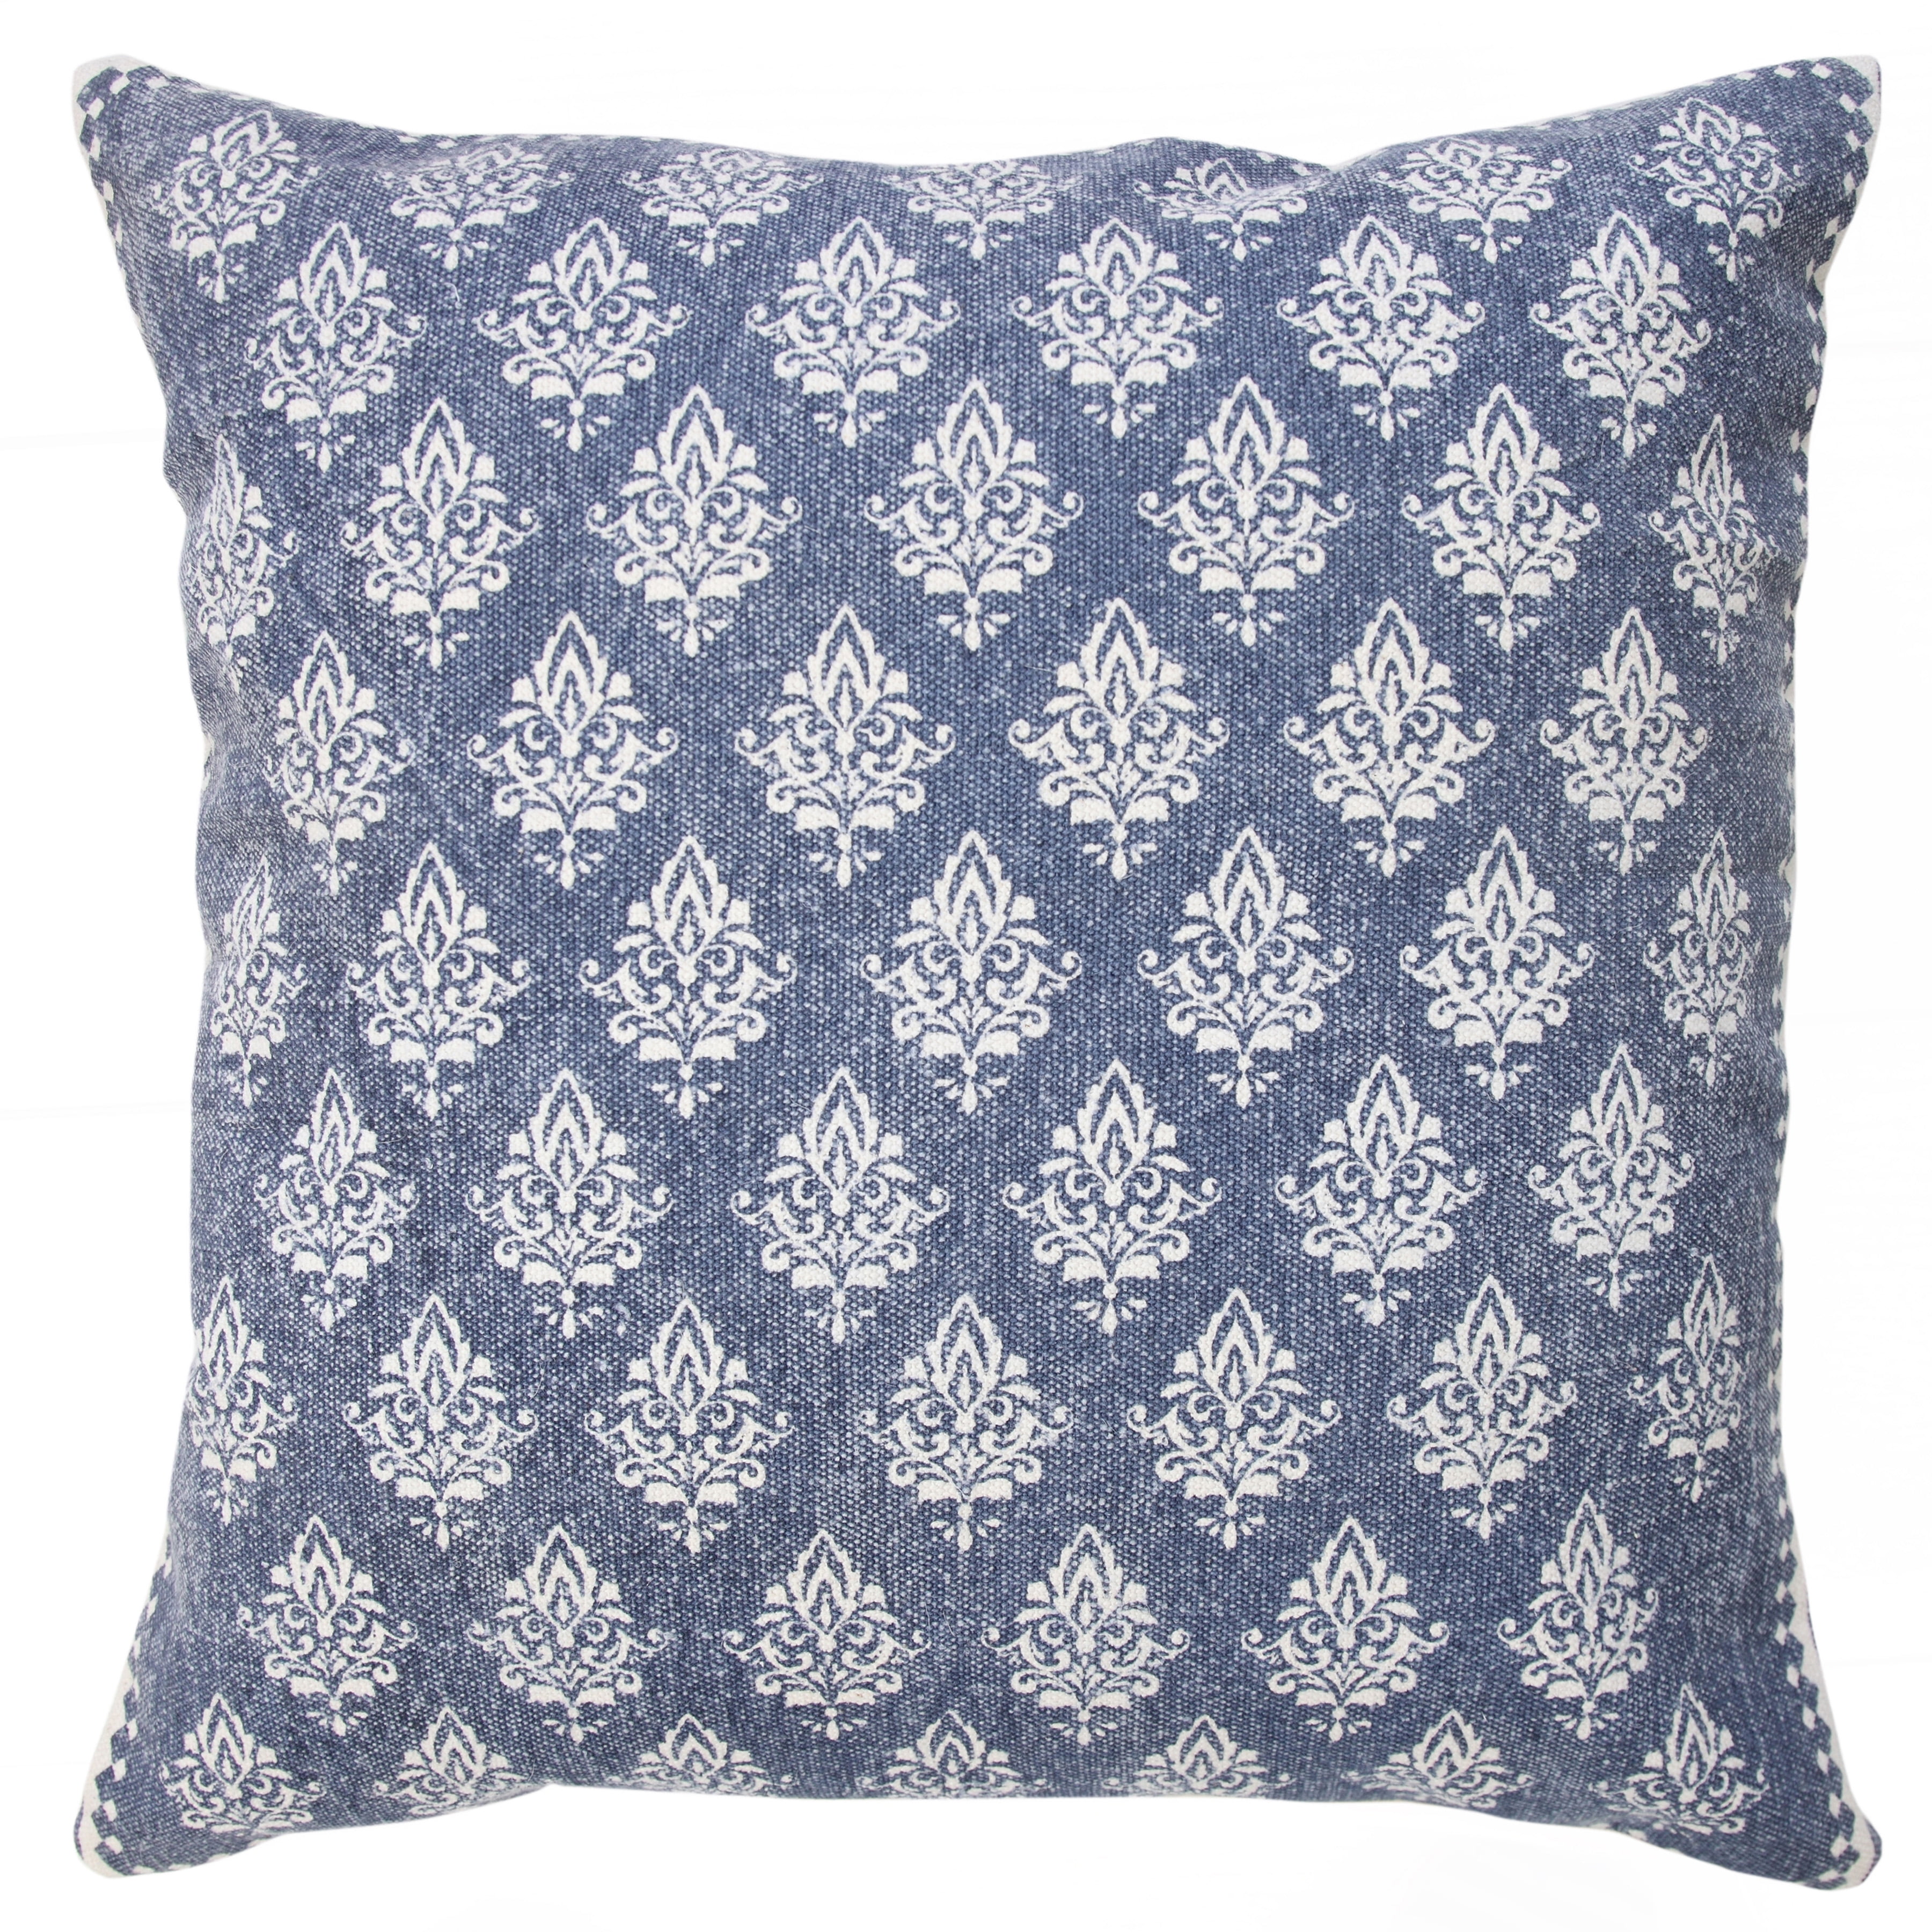 Extra-long Blue White Confetti Embroidered Throw Pillow Cover